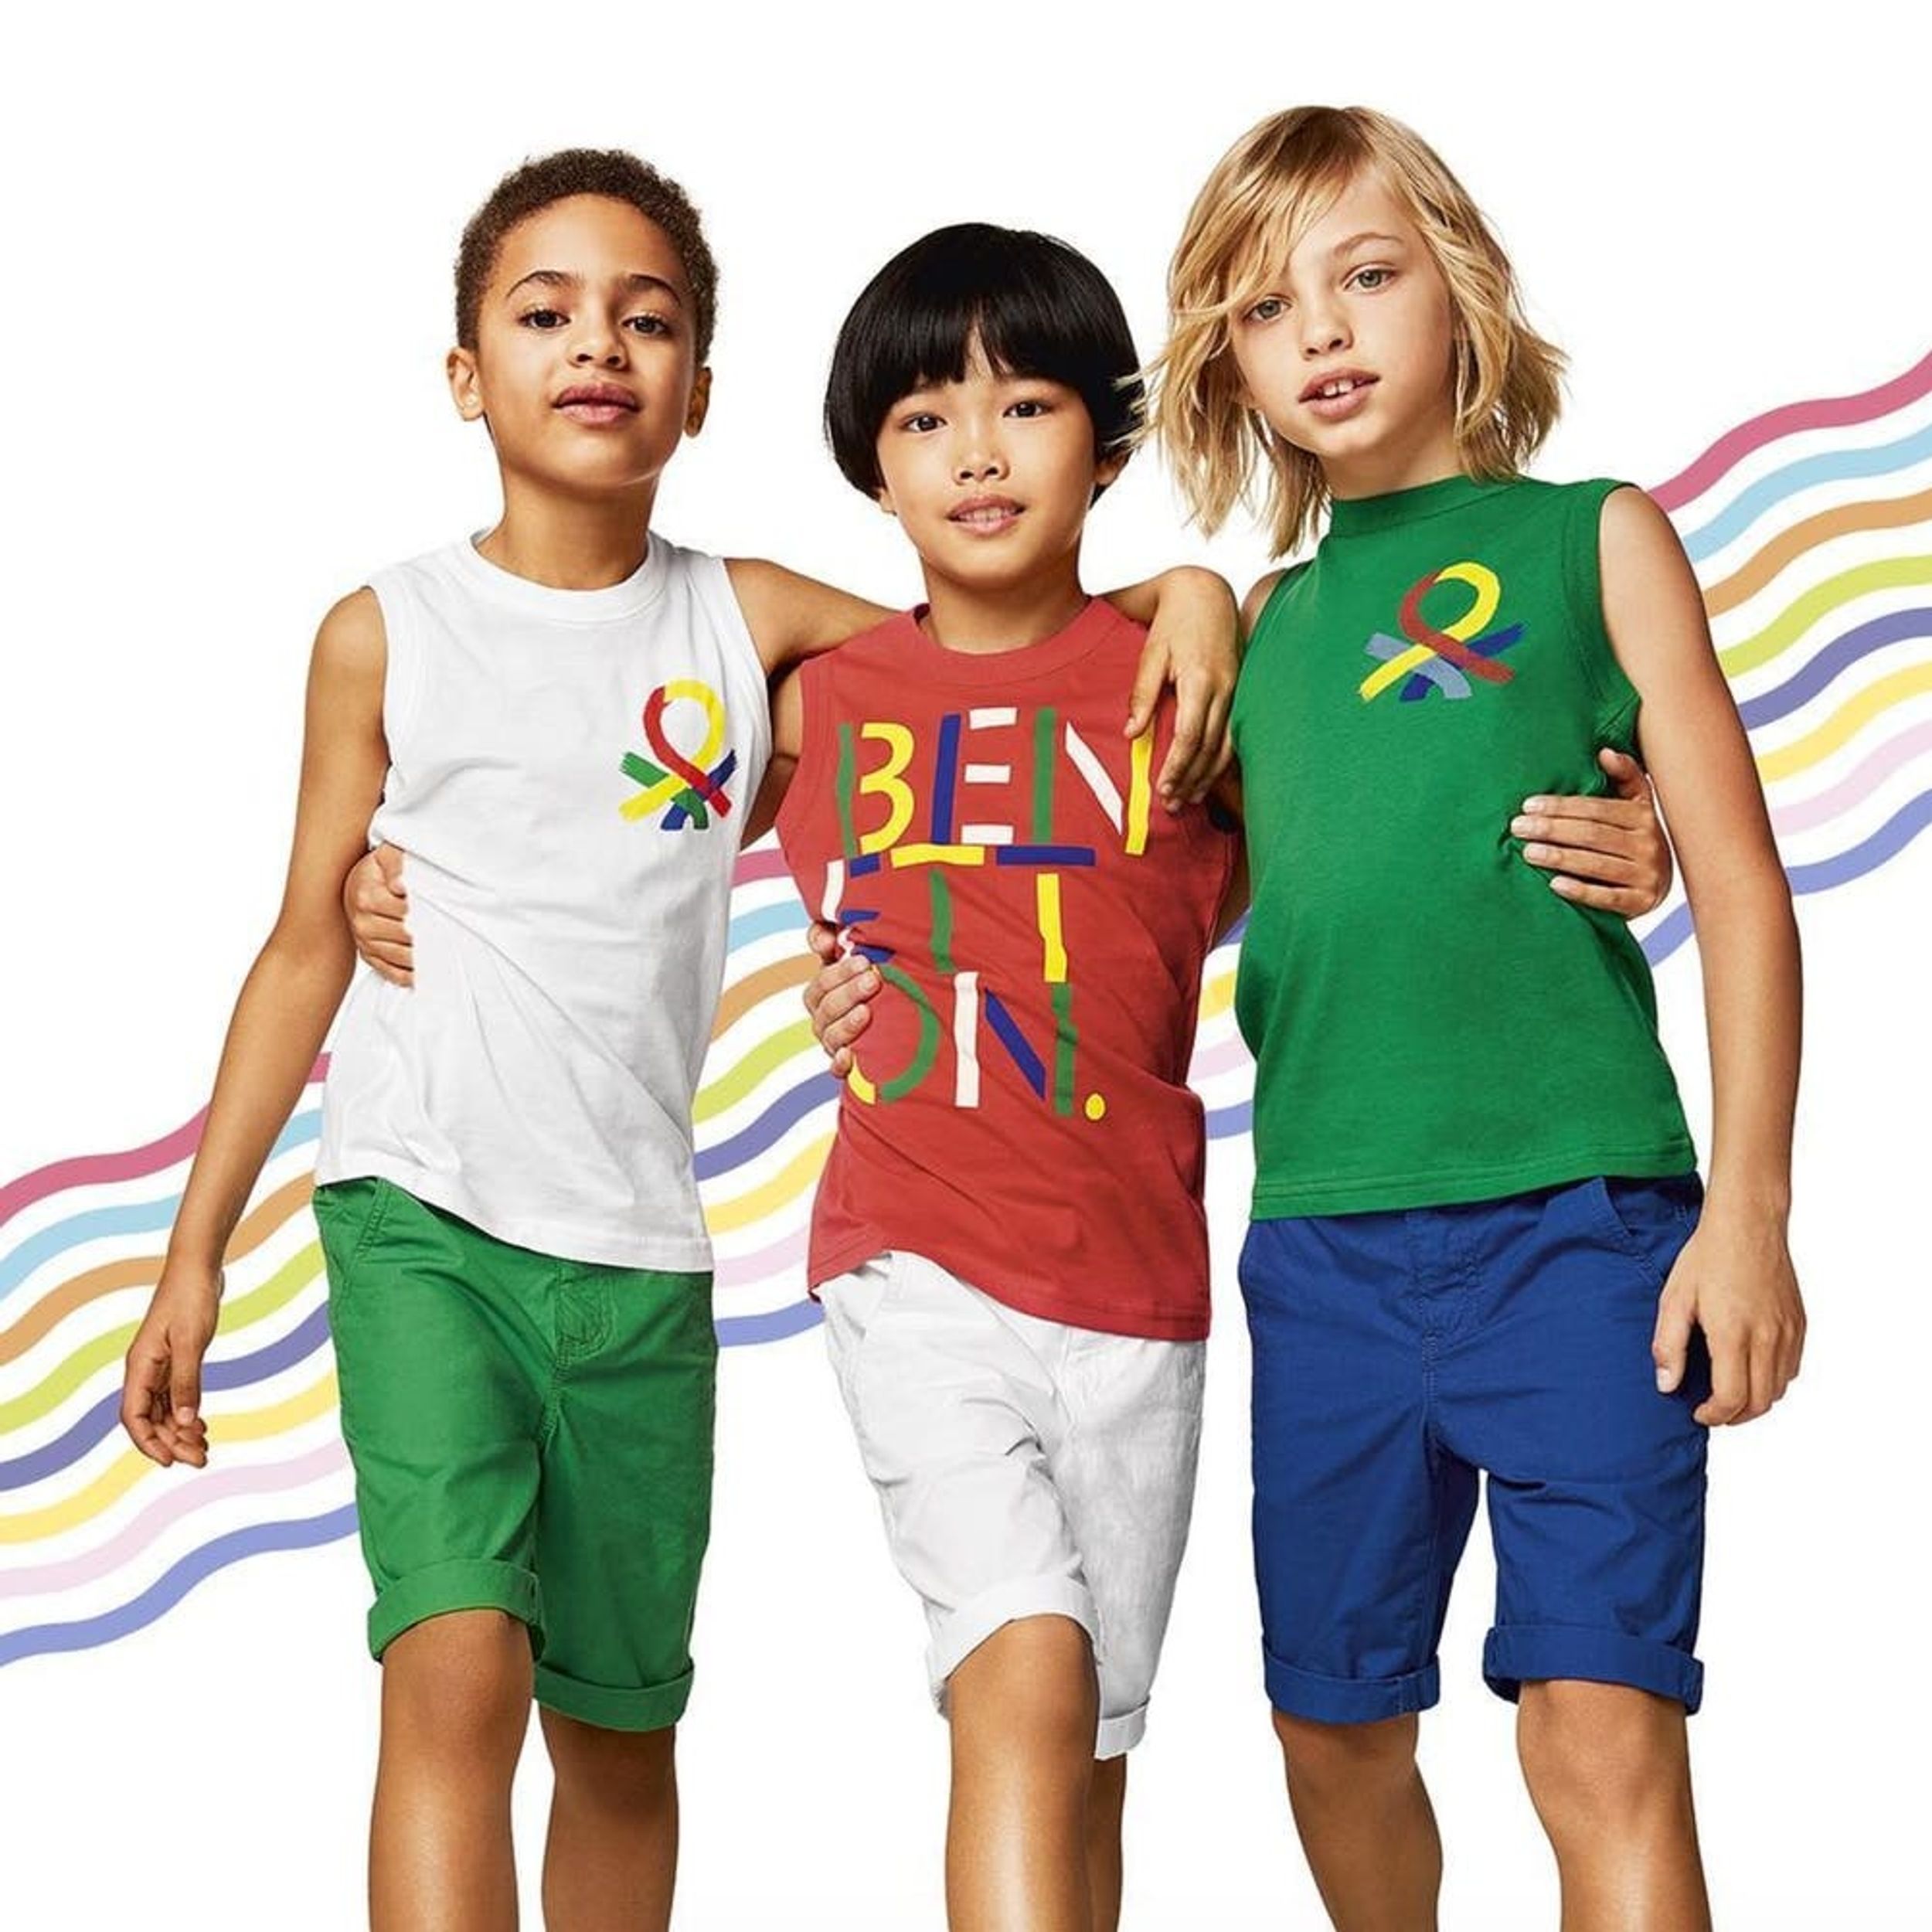 Benetton’s “No Girls Allowed” Comment Has the Internet Seriously Angry ...